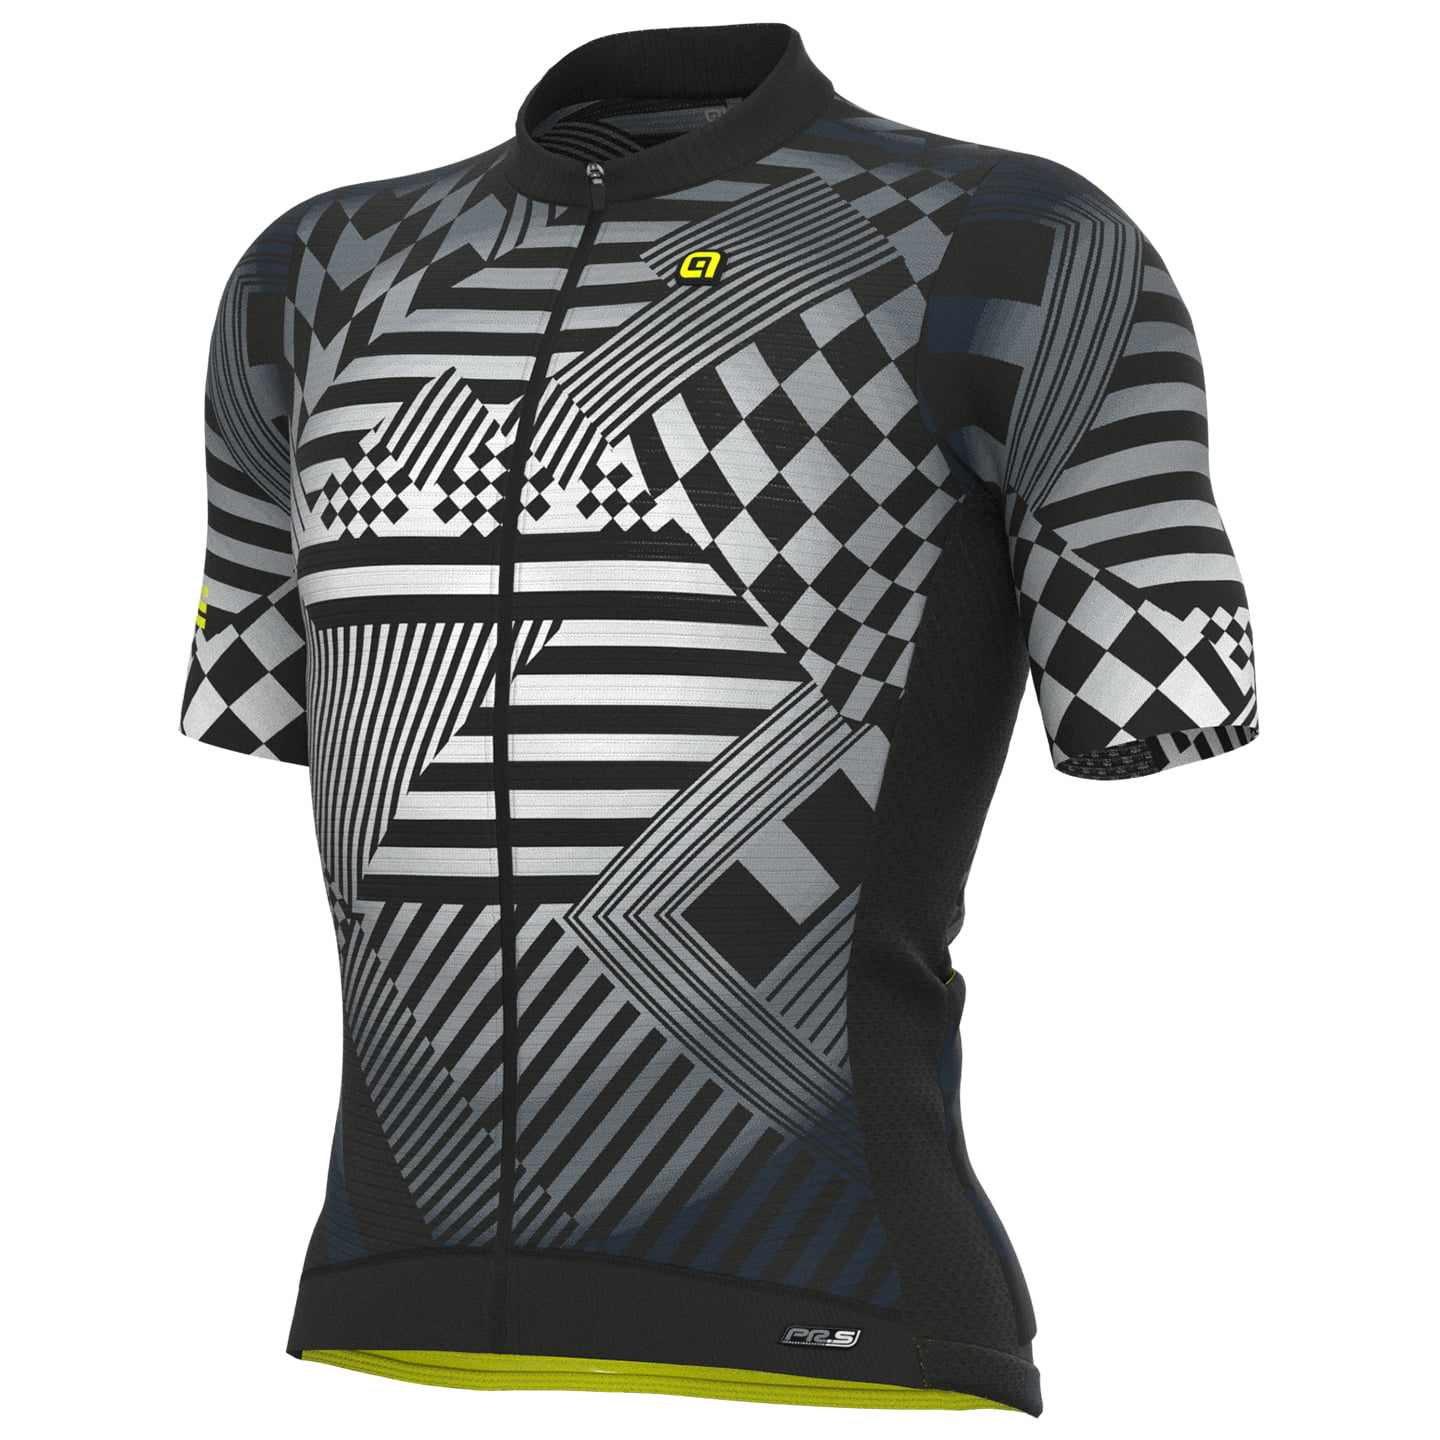 ALE Checkers Short Sleeve Jersey Short Sleeve Jersey, for men, size L, Cycling jersey, Cycling clothing